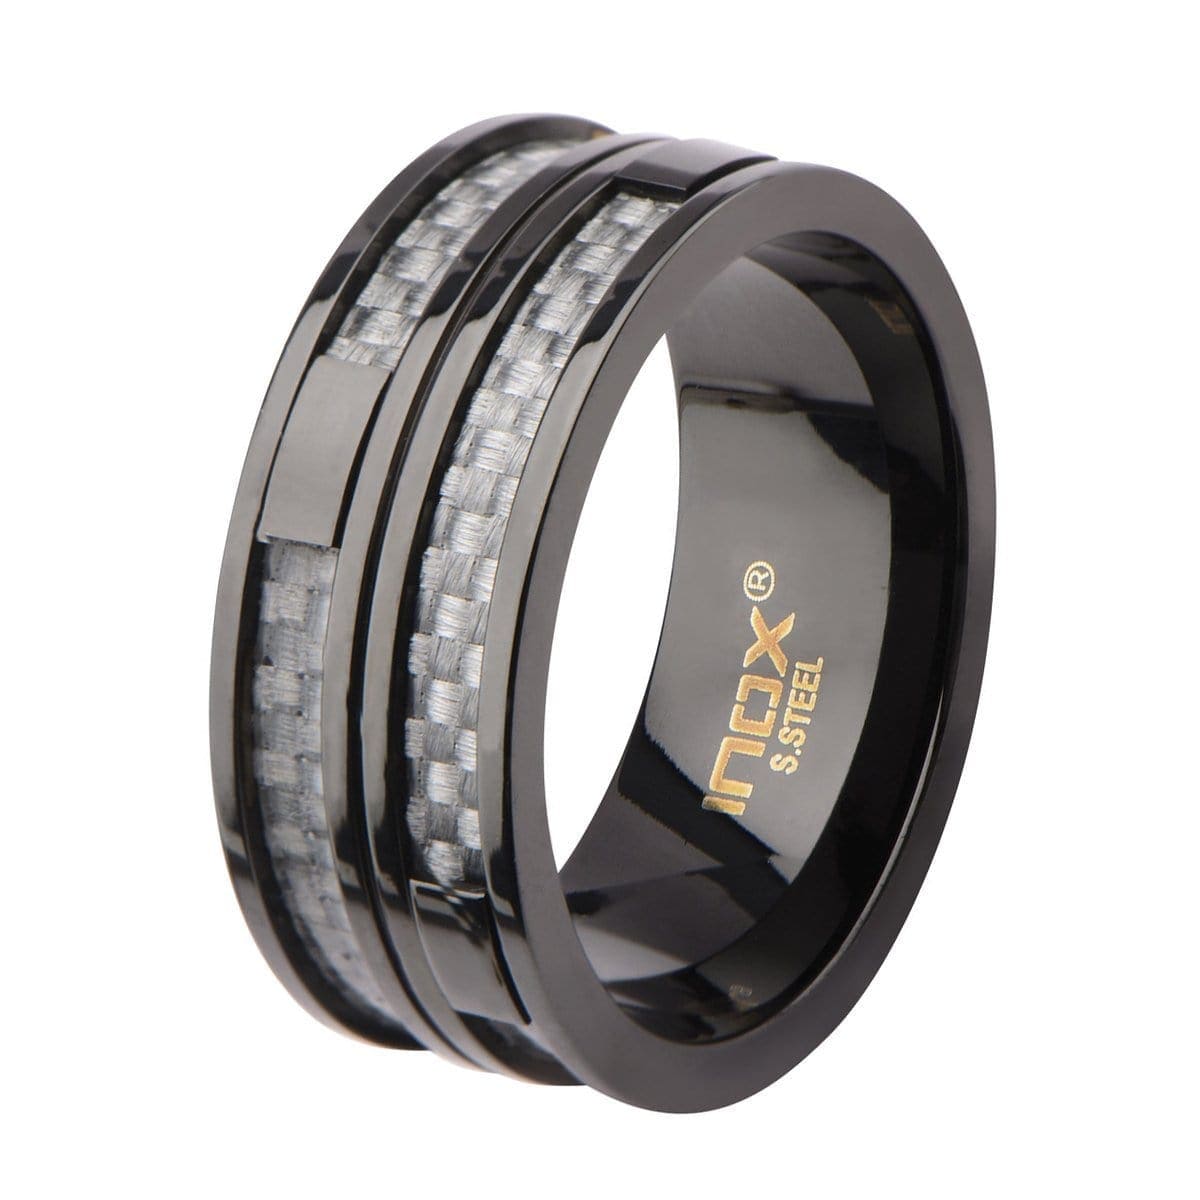 INOX JEWELRY Rings Black Stainless Steel Gray Carbon Fiber Double Layer Banded Ring